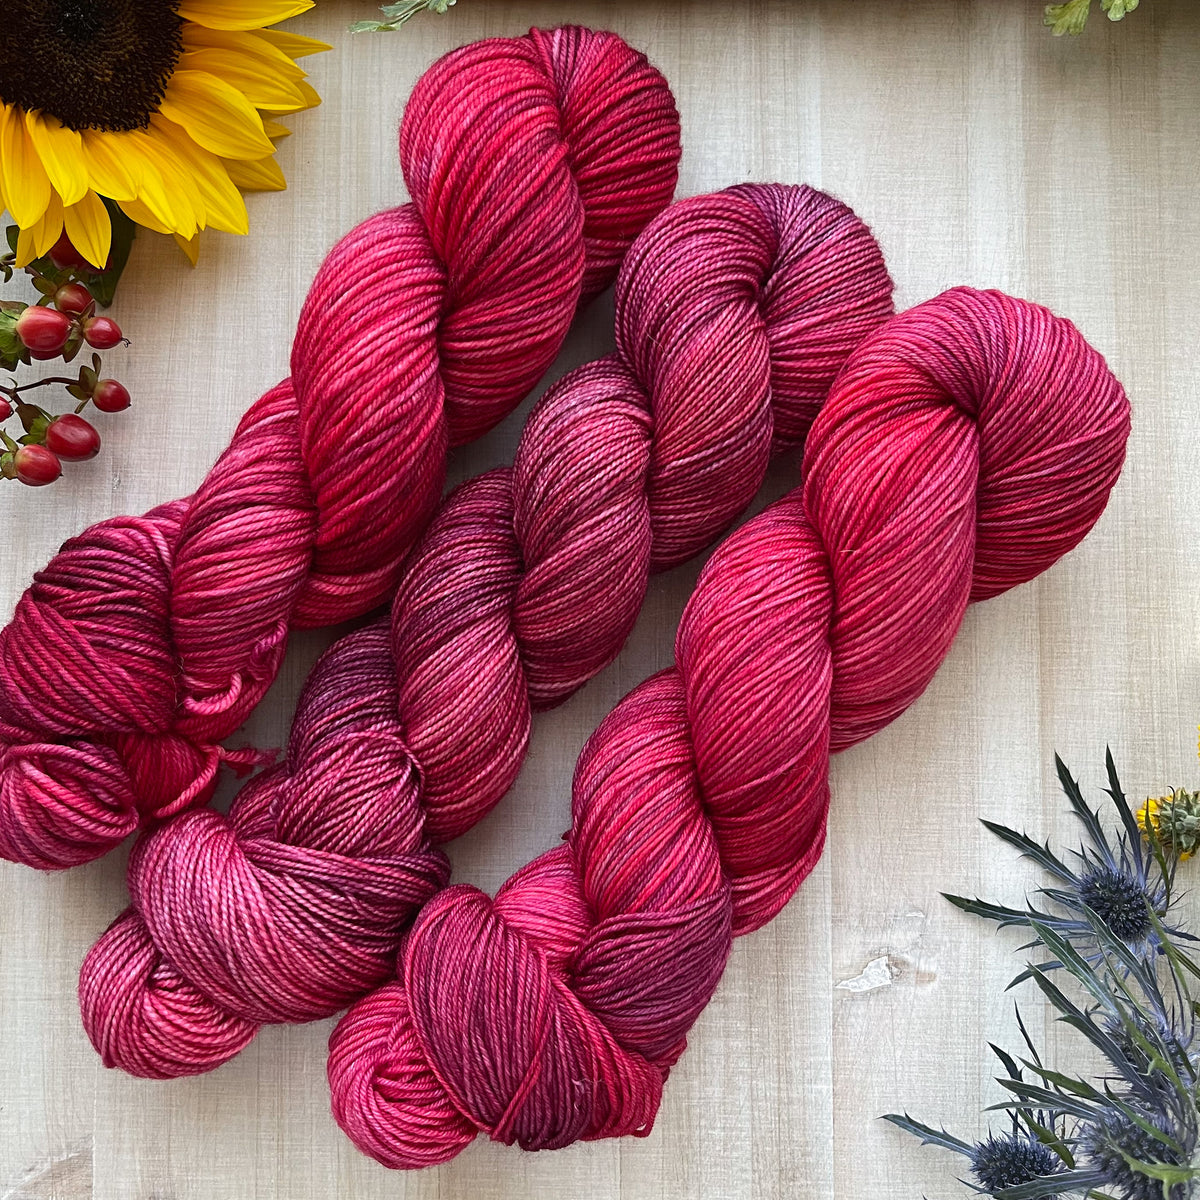 RED MAPLES  -  Dyed to Order - Hand Dyed Yarn Skein